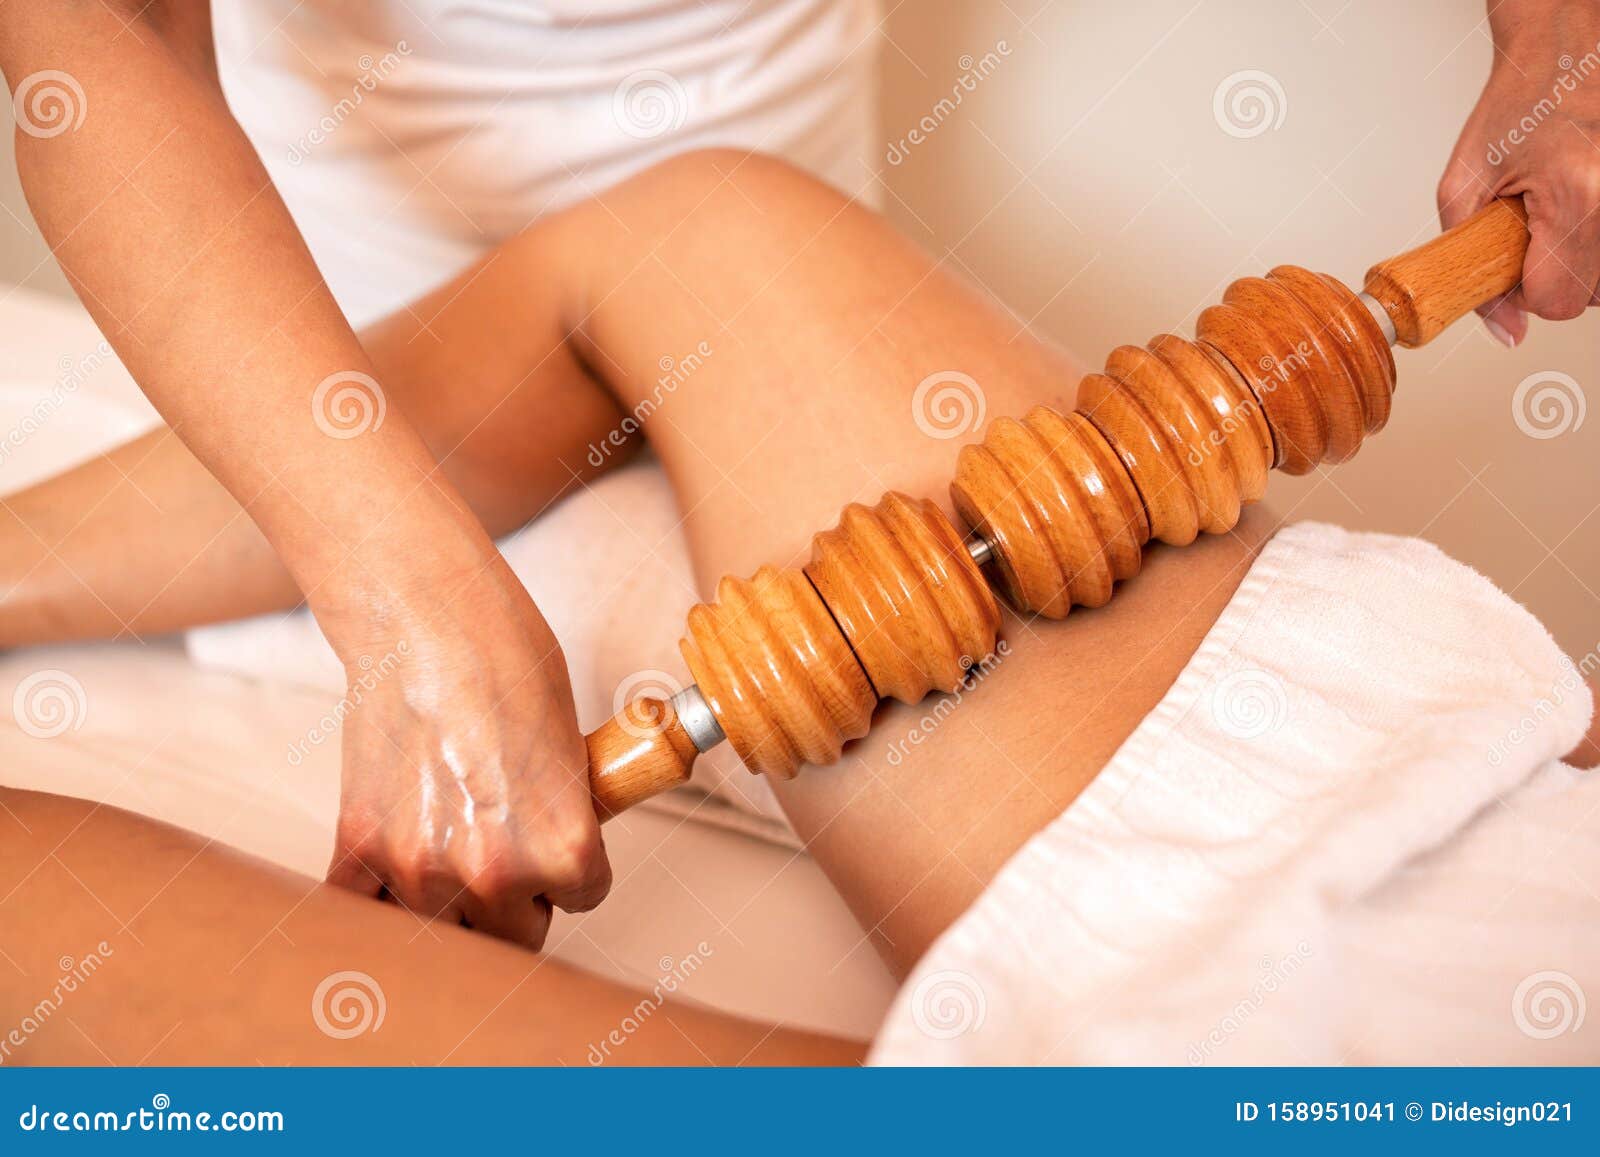 maderotherapy with a wooden roller